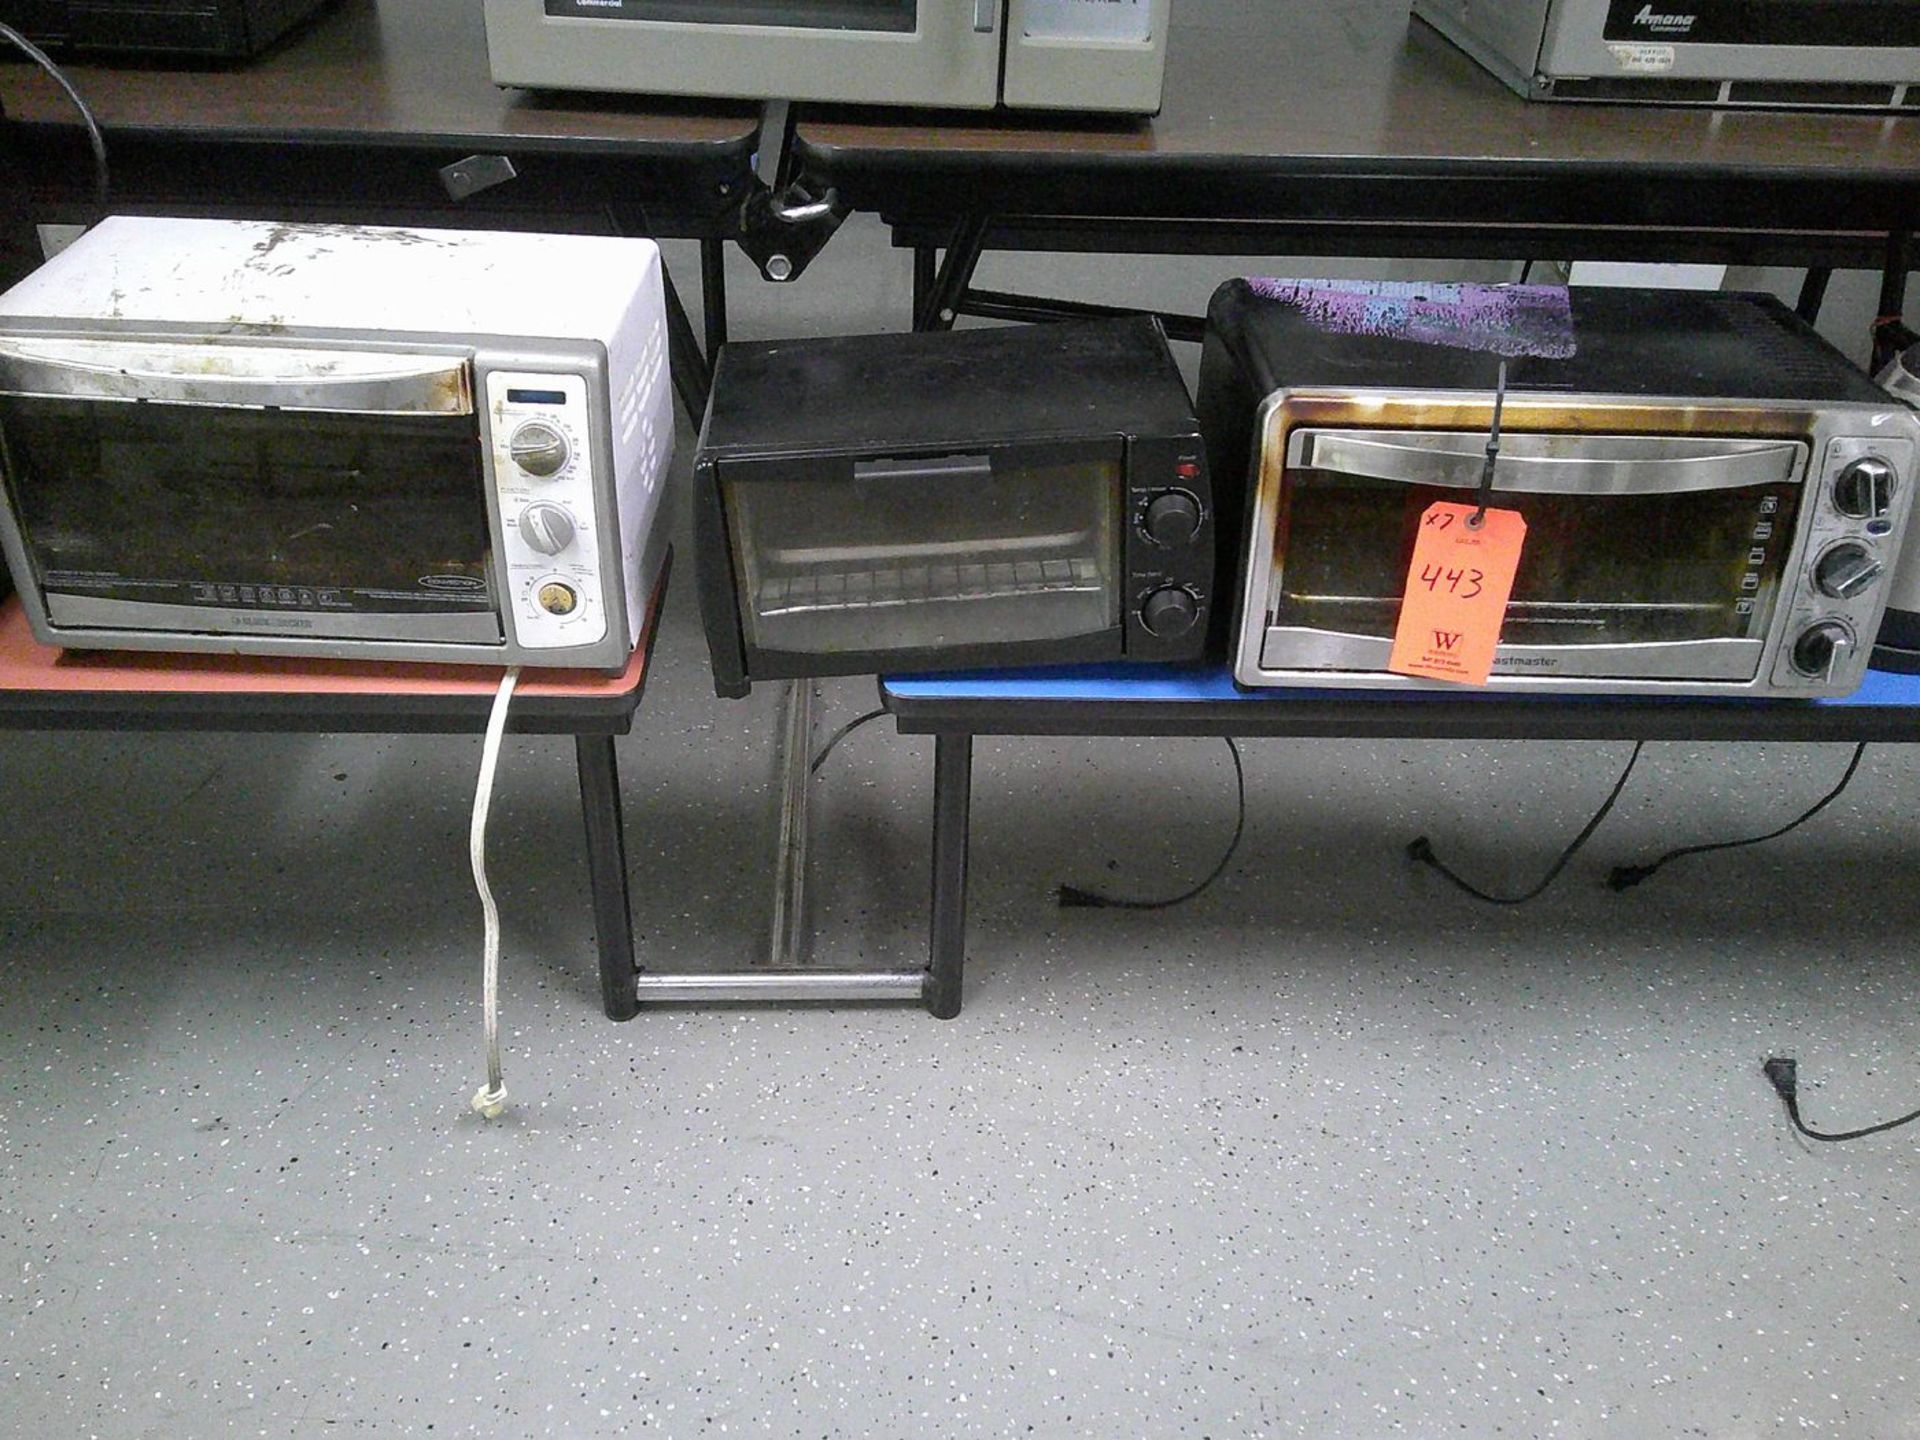 Lot - (3) Toaster Ovens, (4) Coffee Makers - Image 2 of 3